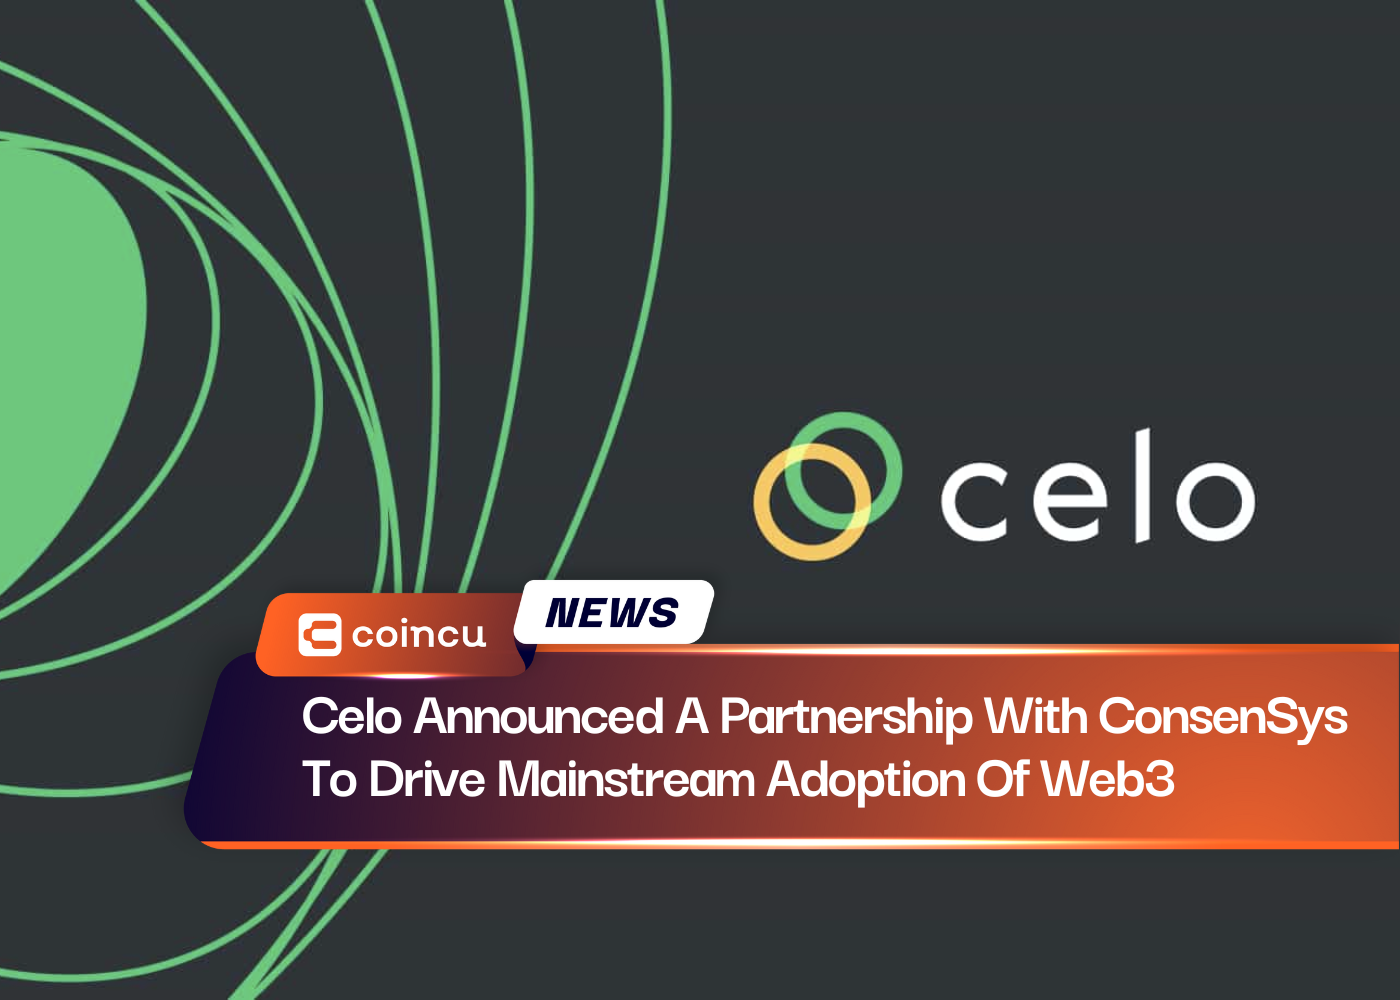 Celo Announced A Partnership With ConsenSys To Drive Mainstream Adoption Of Web3